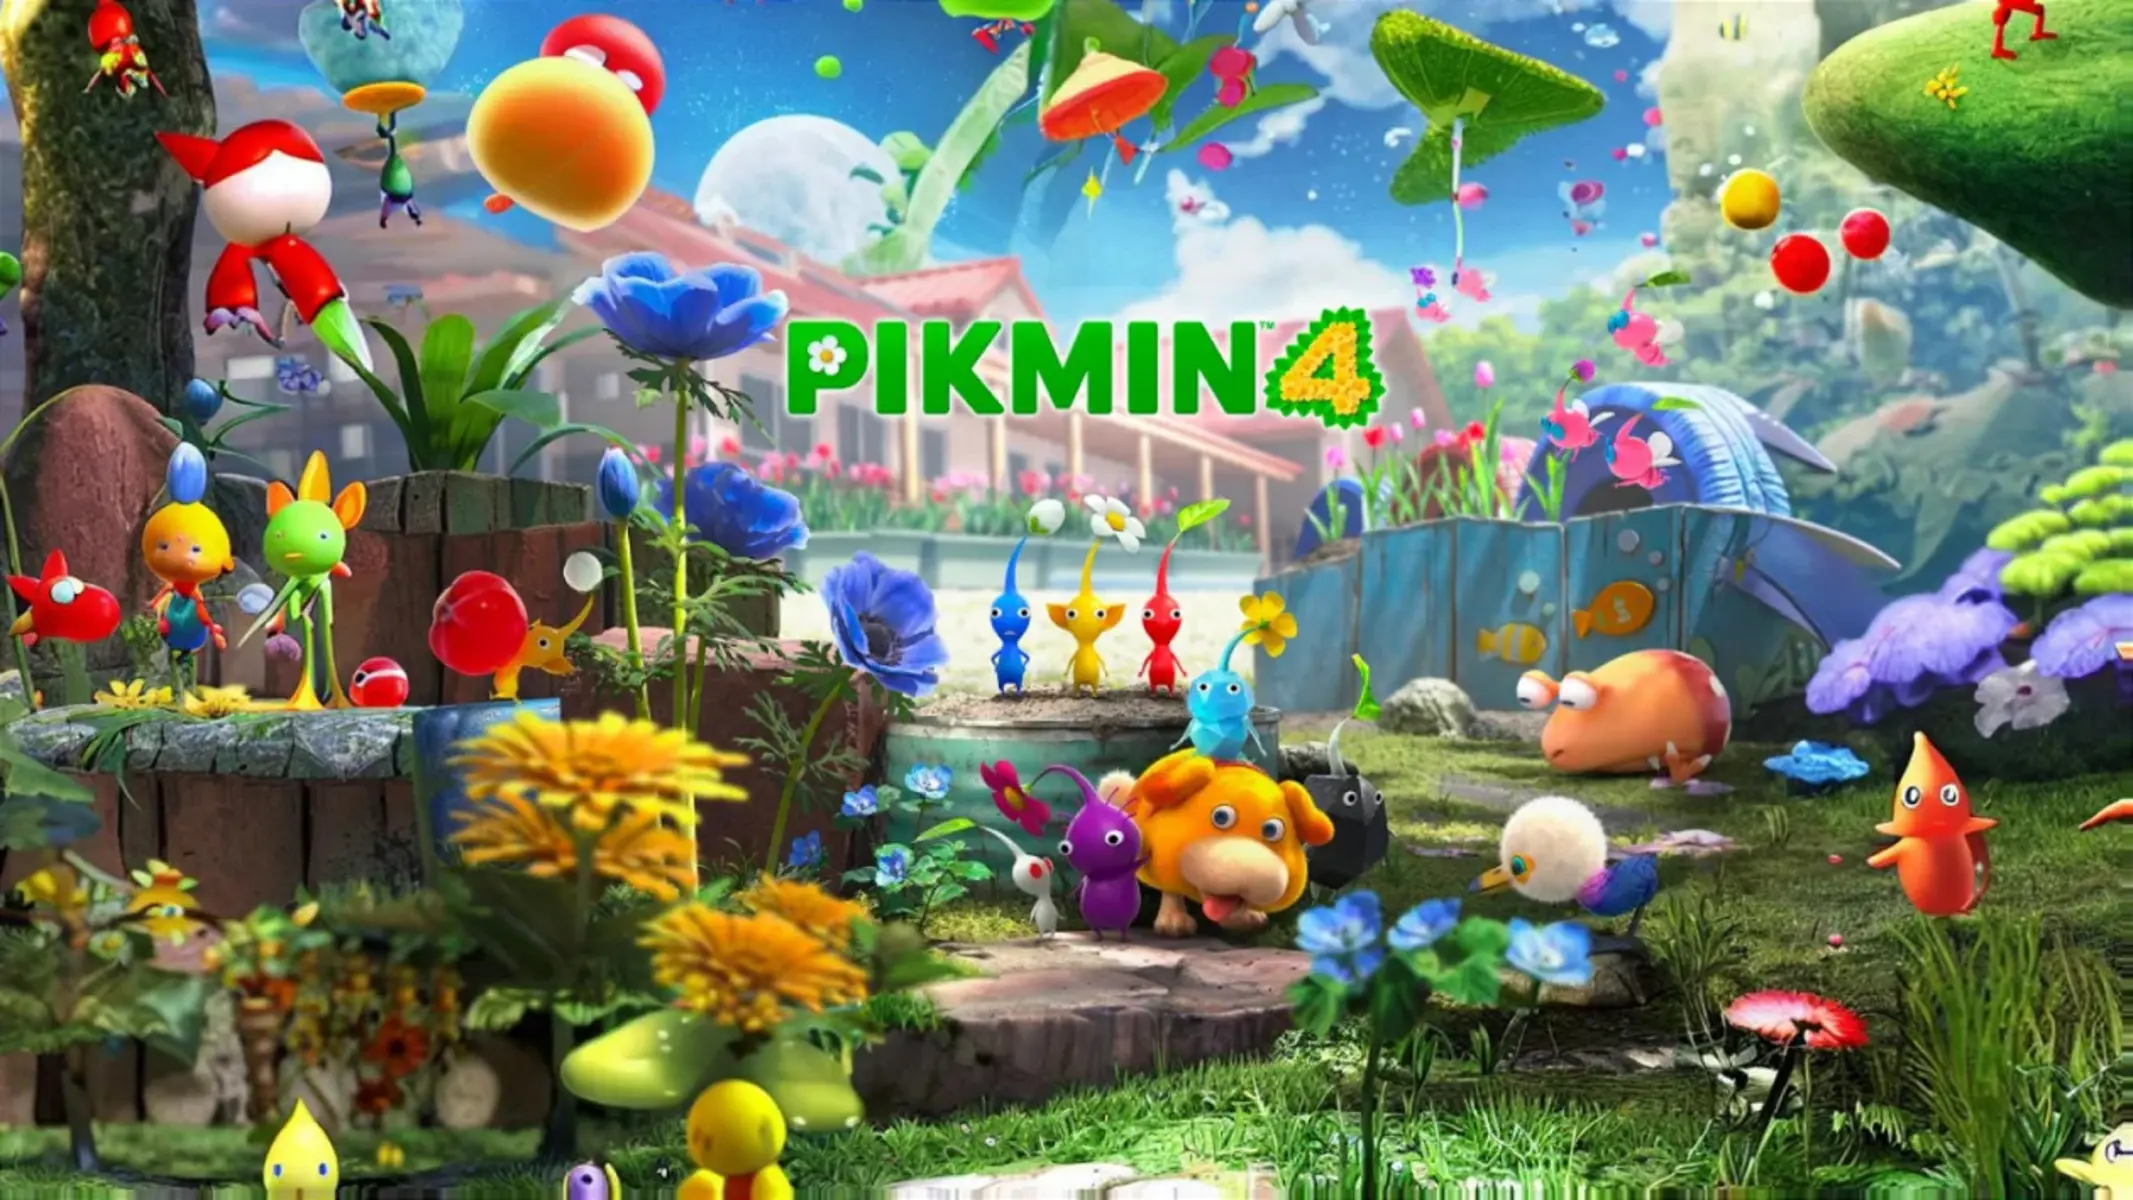 pikmin 4 cover 1